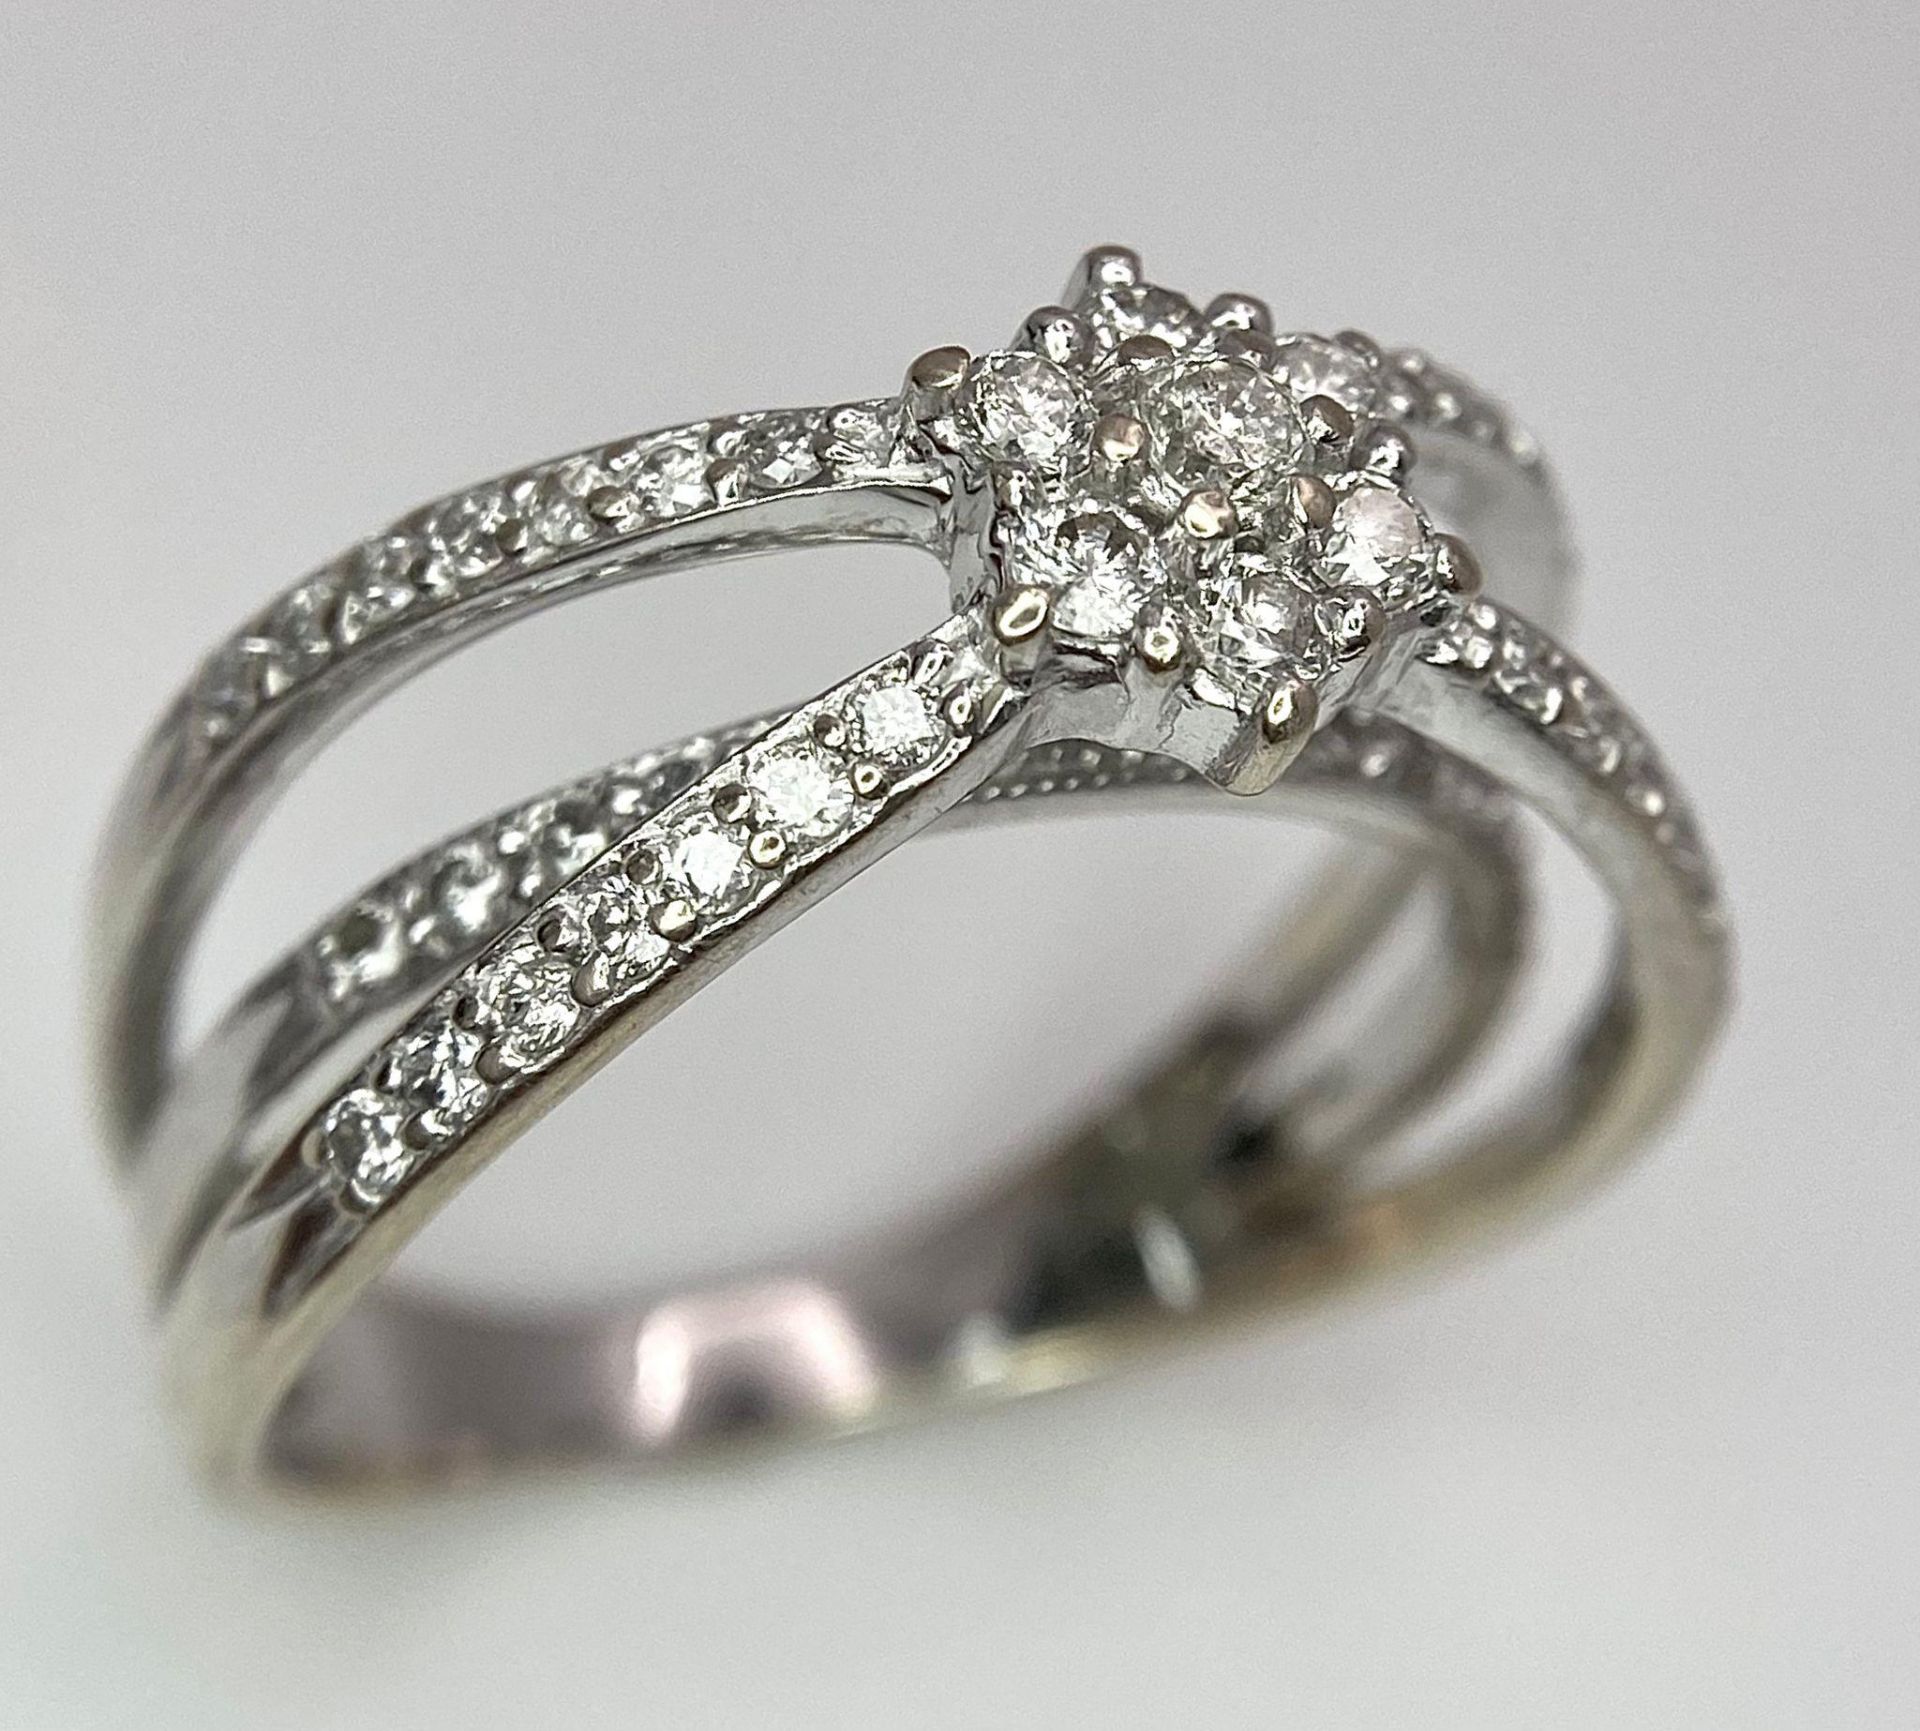 A UNIQUE DESIGNED 18K WHITE GOLD DIAMOND SPLIT RING, APPROX 0.40CT DIAMONDS, WEIGHT 4.9G SIZE O - Image 3 of 6